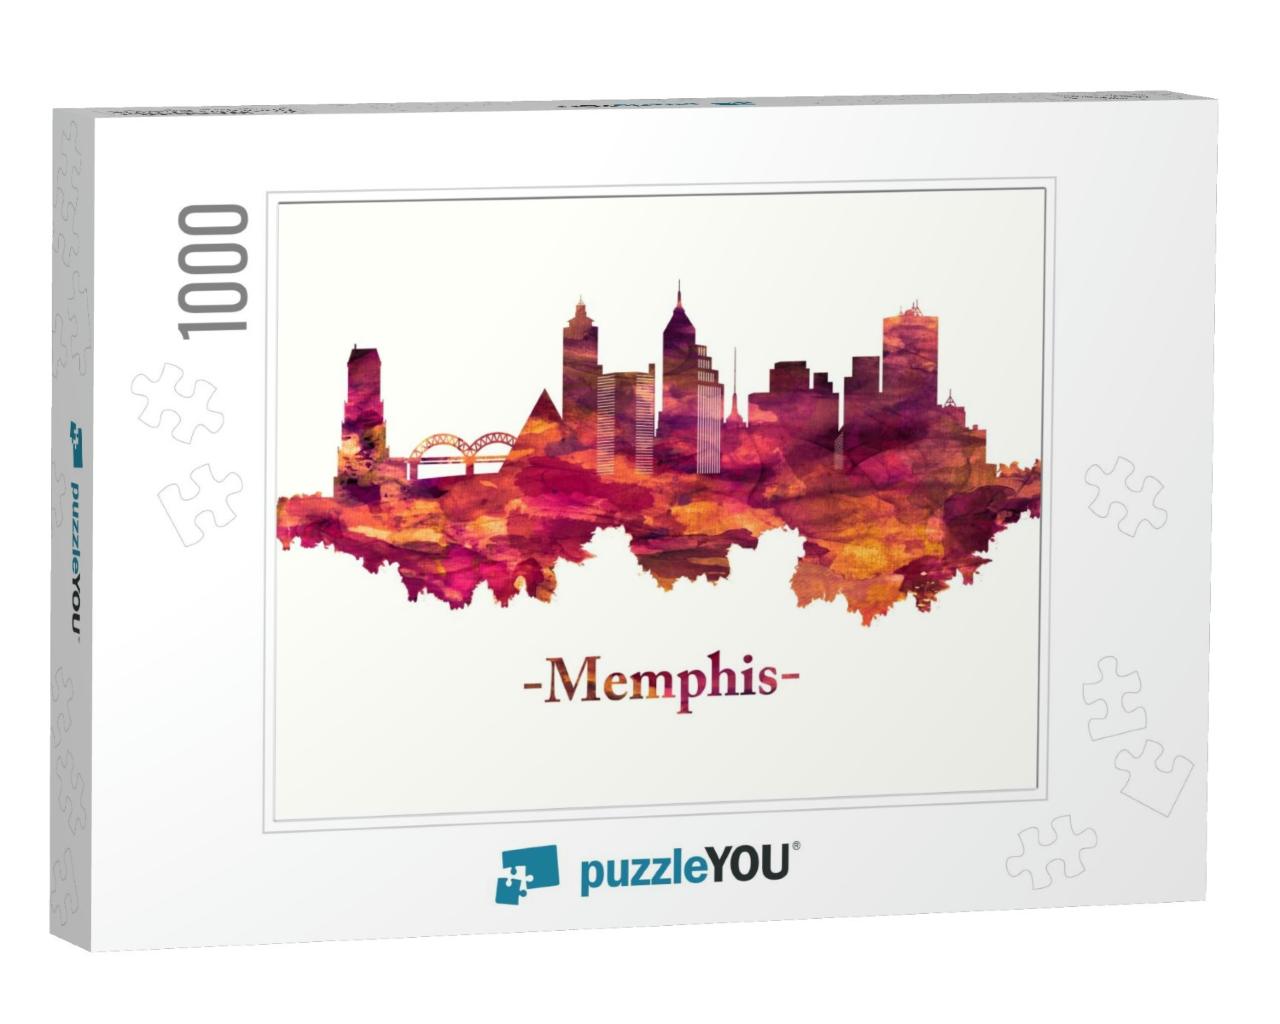 Red Skyline of Memphis, a City on the Mississippi River i... Jigsaw Puzzle with 1000 pieces